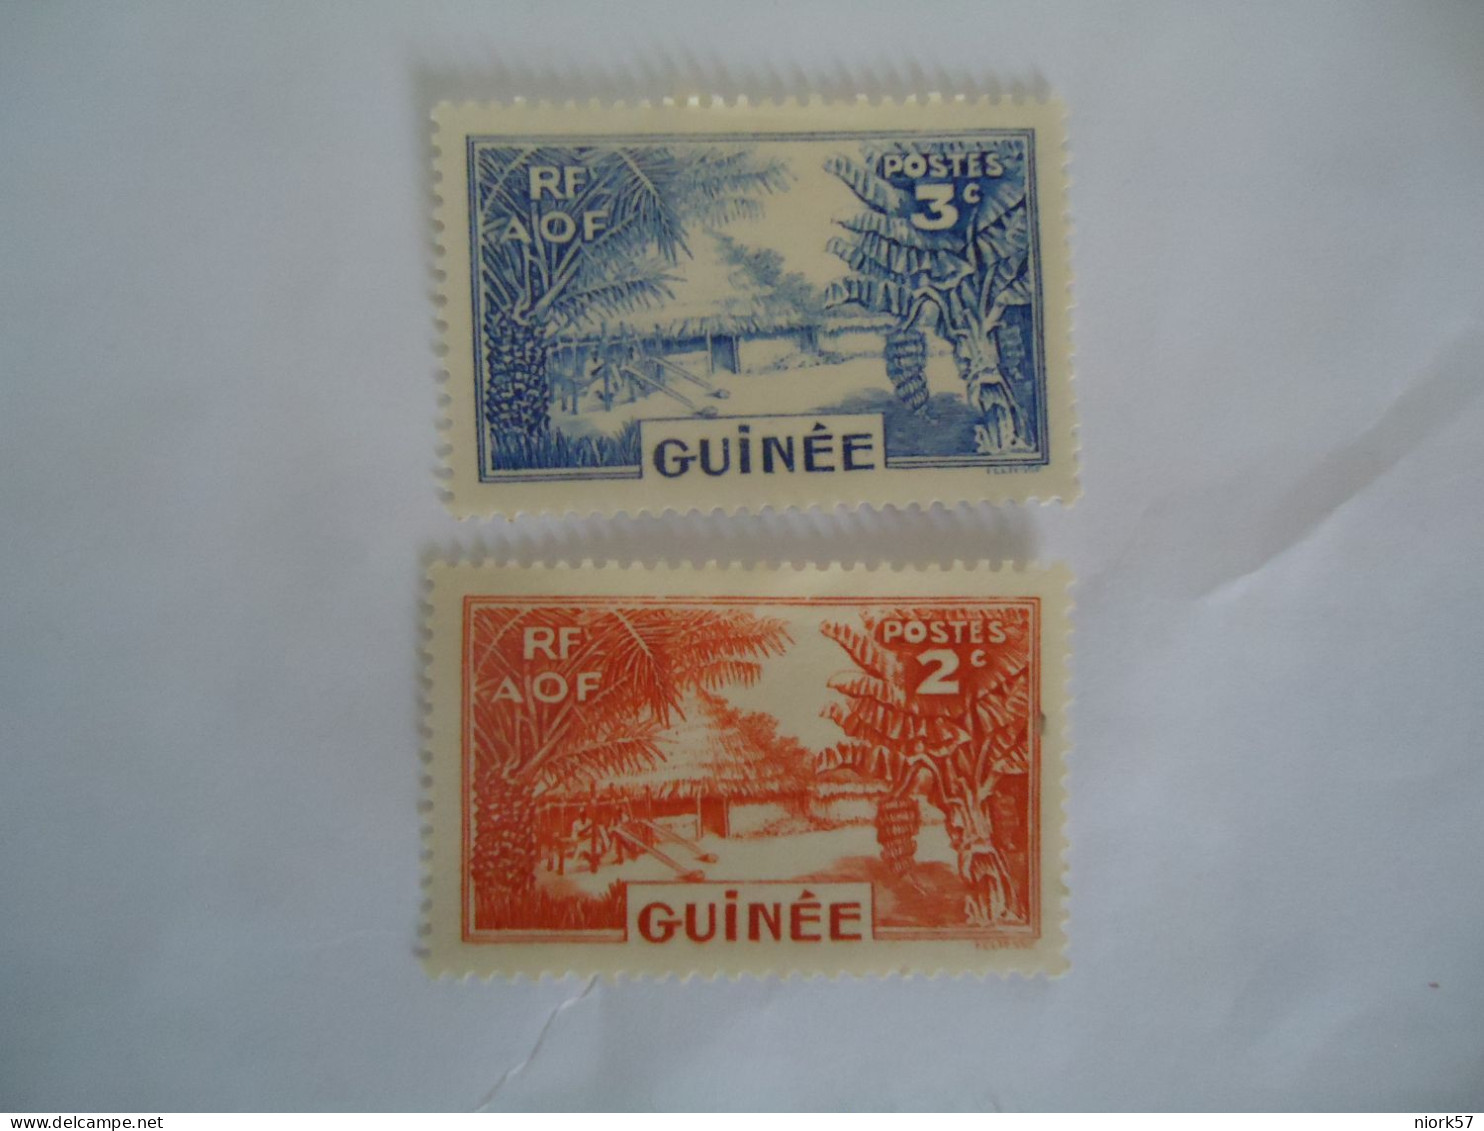 GUINEE  GUINEA  MLN STAMPS 2 LANDSCAPES - Guinee (1958-...)